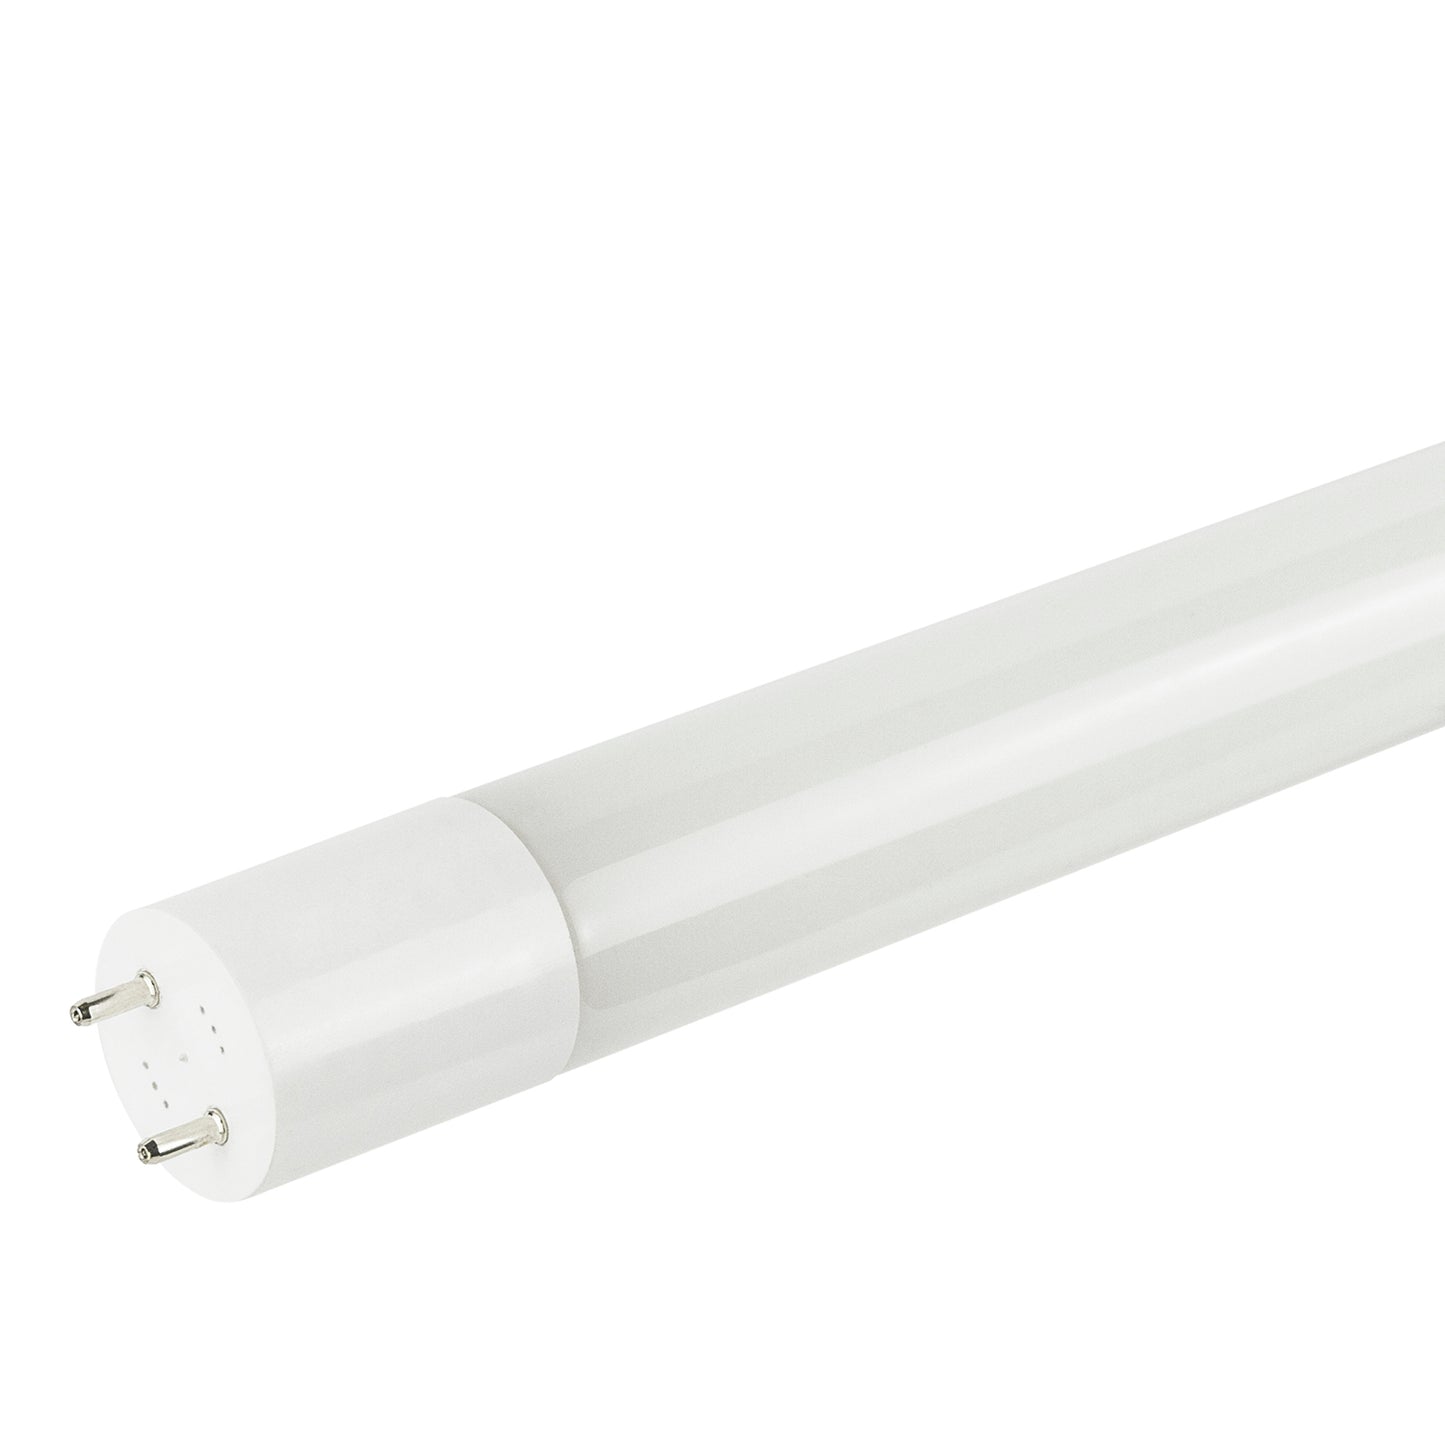 Sunlite 87926 LED T8 Plug & Play light Tube (Type A) 4 foot, 14 Watt (32W Equivalent) 2200 Lumens, Medium G13 Bi-Pin Base, Dual End Connection, Electronic Ballast Compatible, 3500K Warm White, 25 Pack